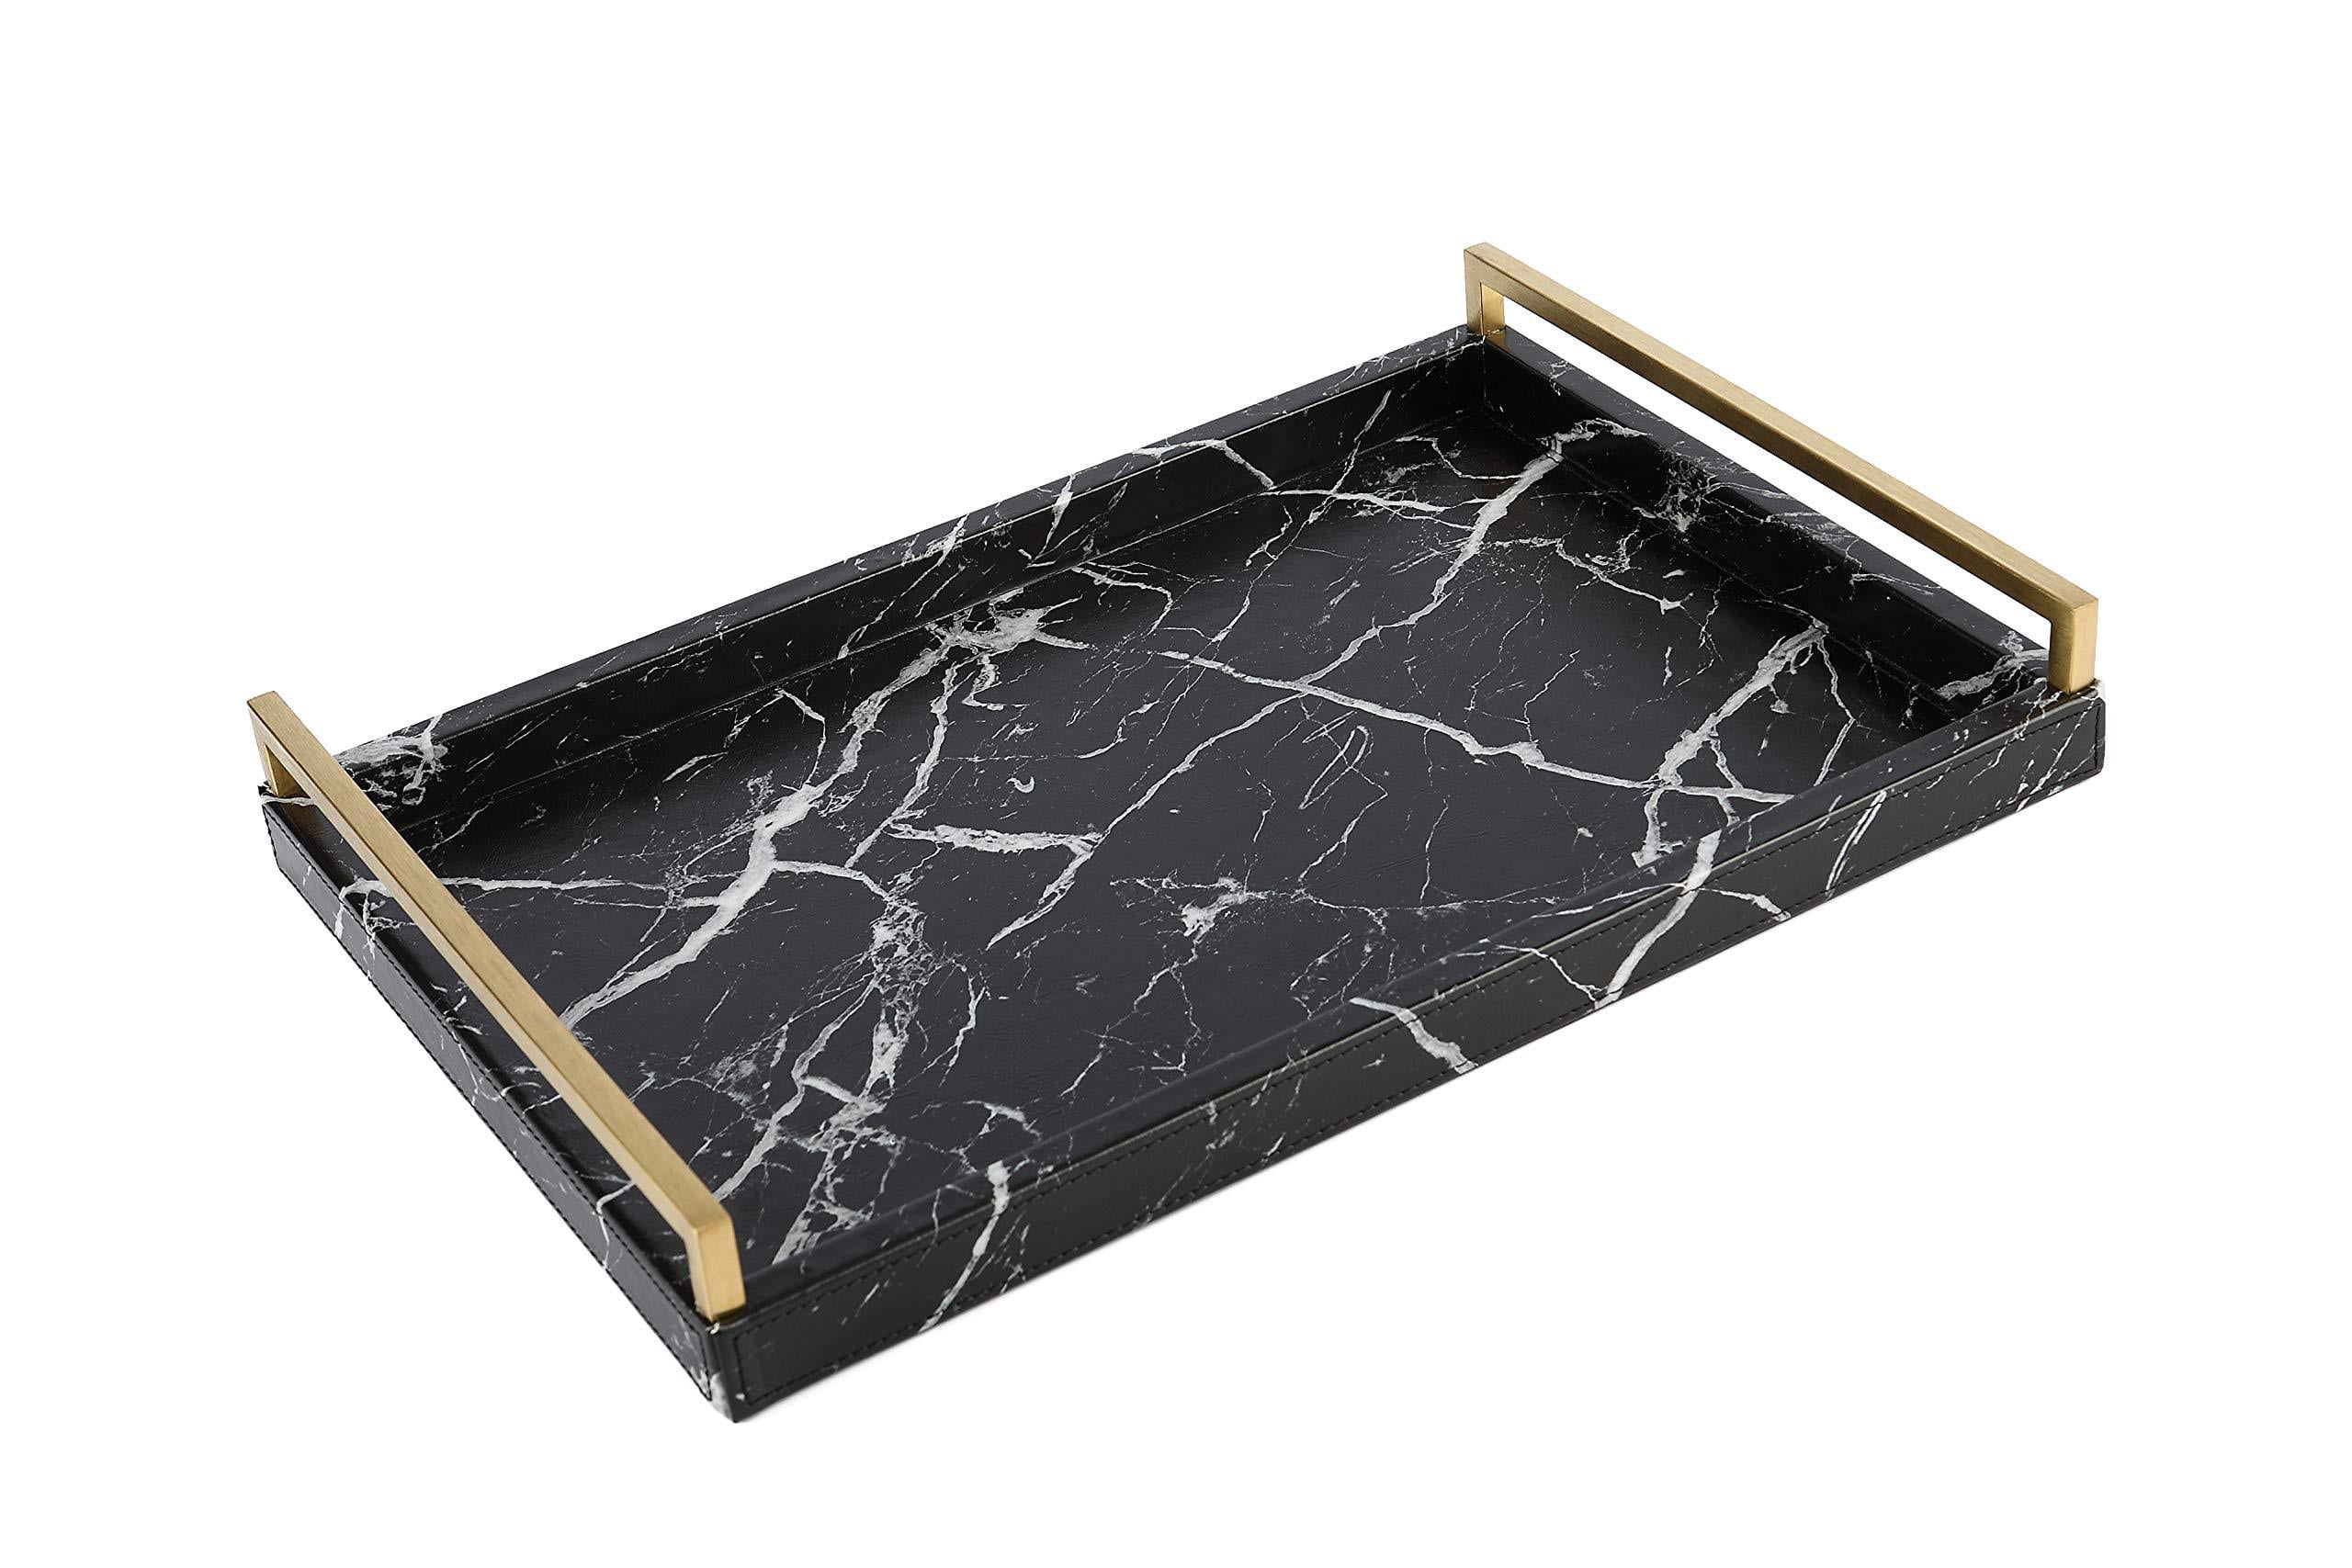 WV Faux Leather Decorative Tray Black Marble Finish with Brushed Ti-Gold Stainless Steel Handle Black